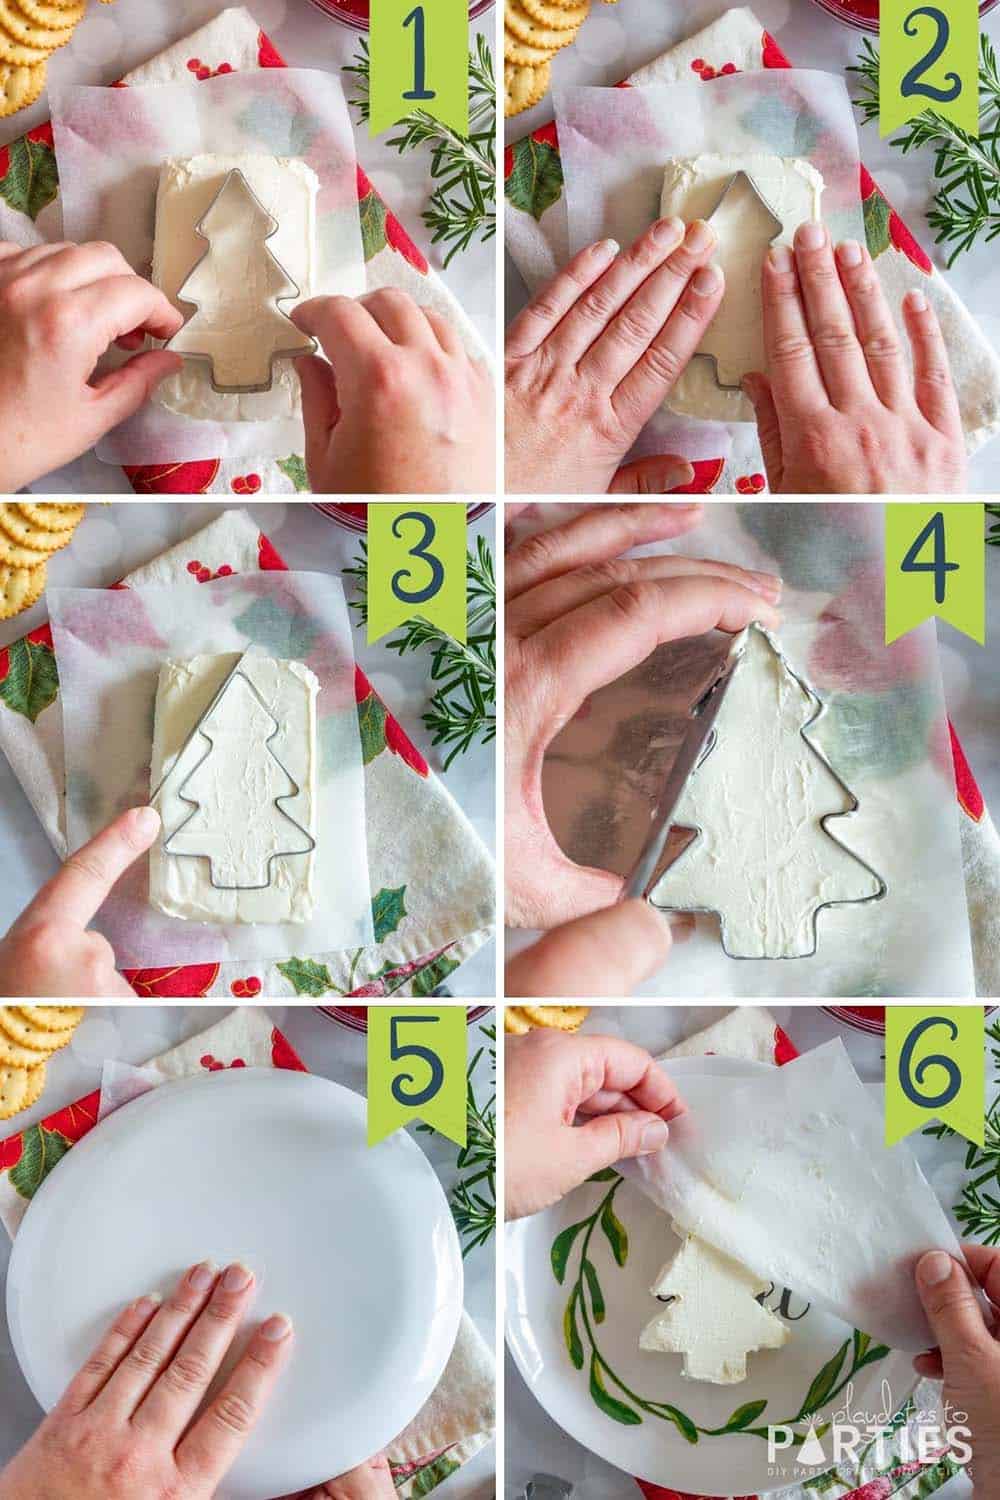 Steps 1-6 showing how to cut a Christmas tree from a brick of cream cheese and transfer it to a plate.